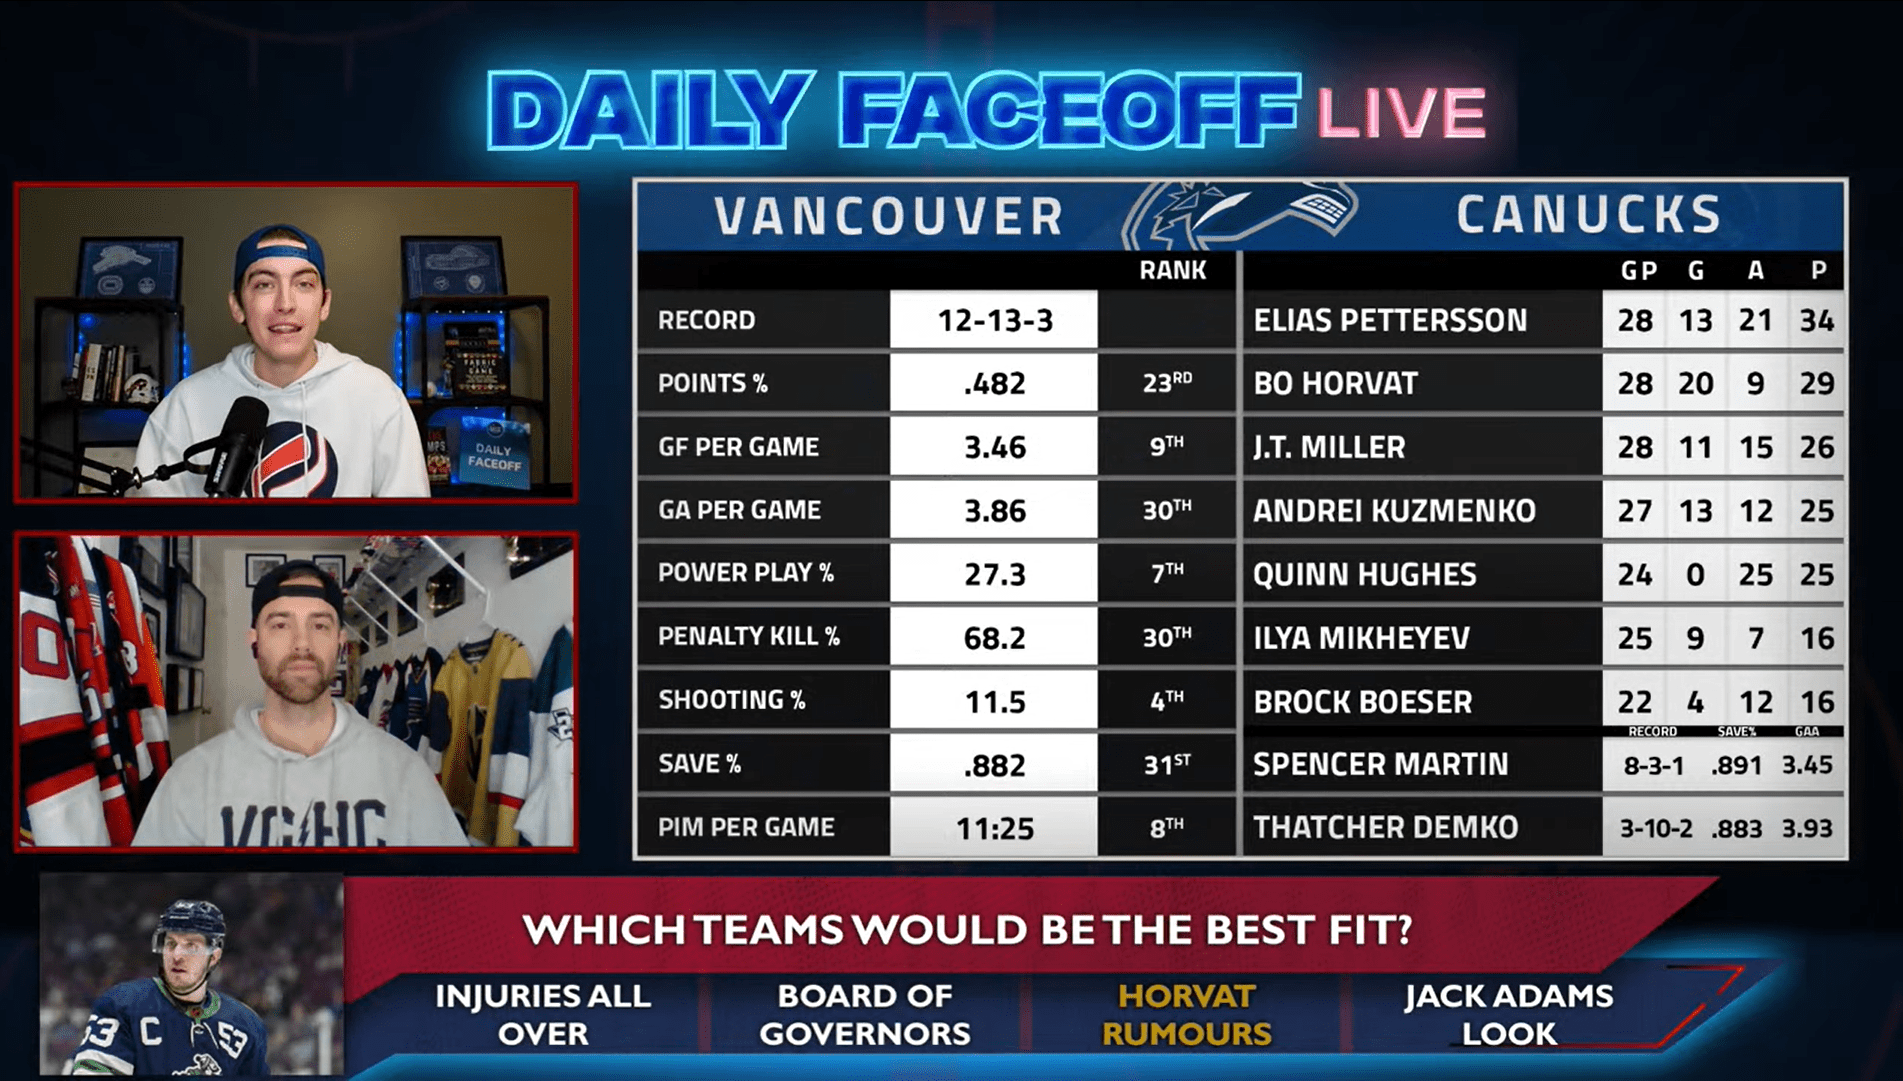 Daily Faceoff Live: What team would be the perfect landing spot for Bo Horvat?